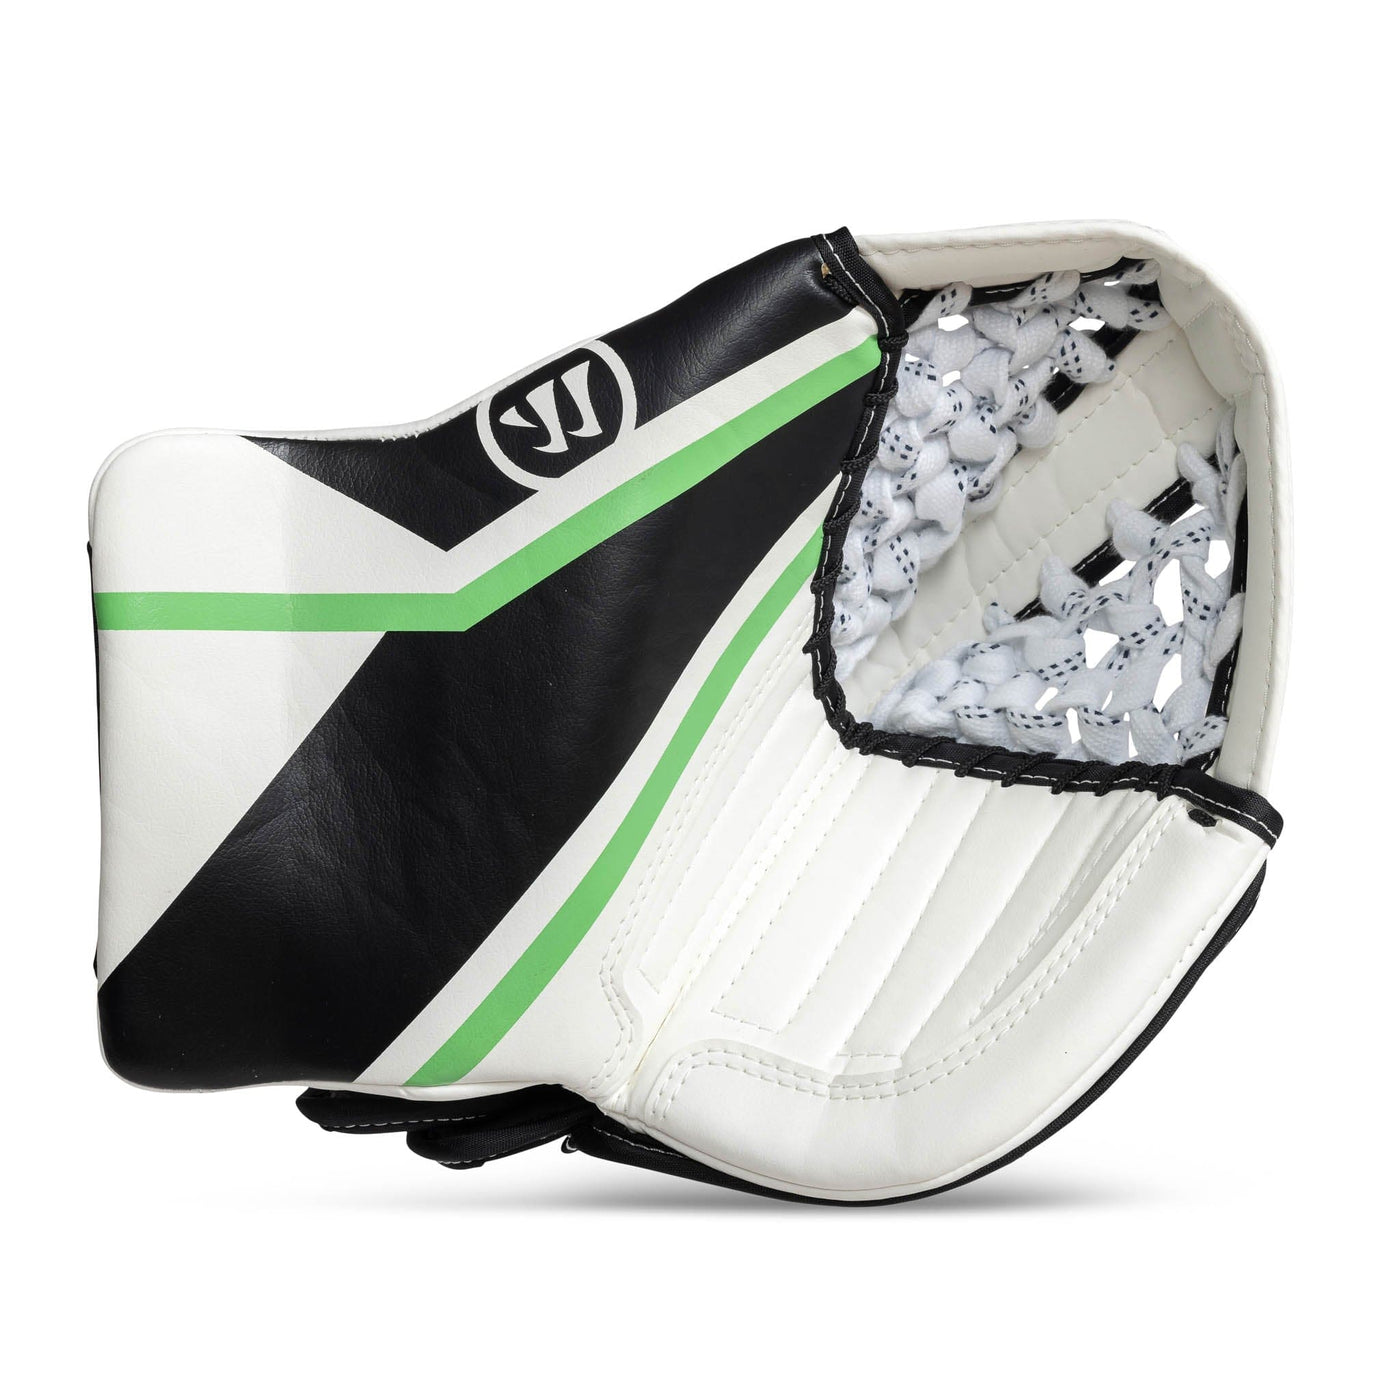 Warrior Ritual G6 E+ Youth Goalie Catcher - The Hockey Shop Source For Sports